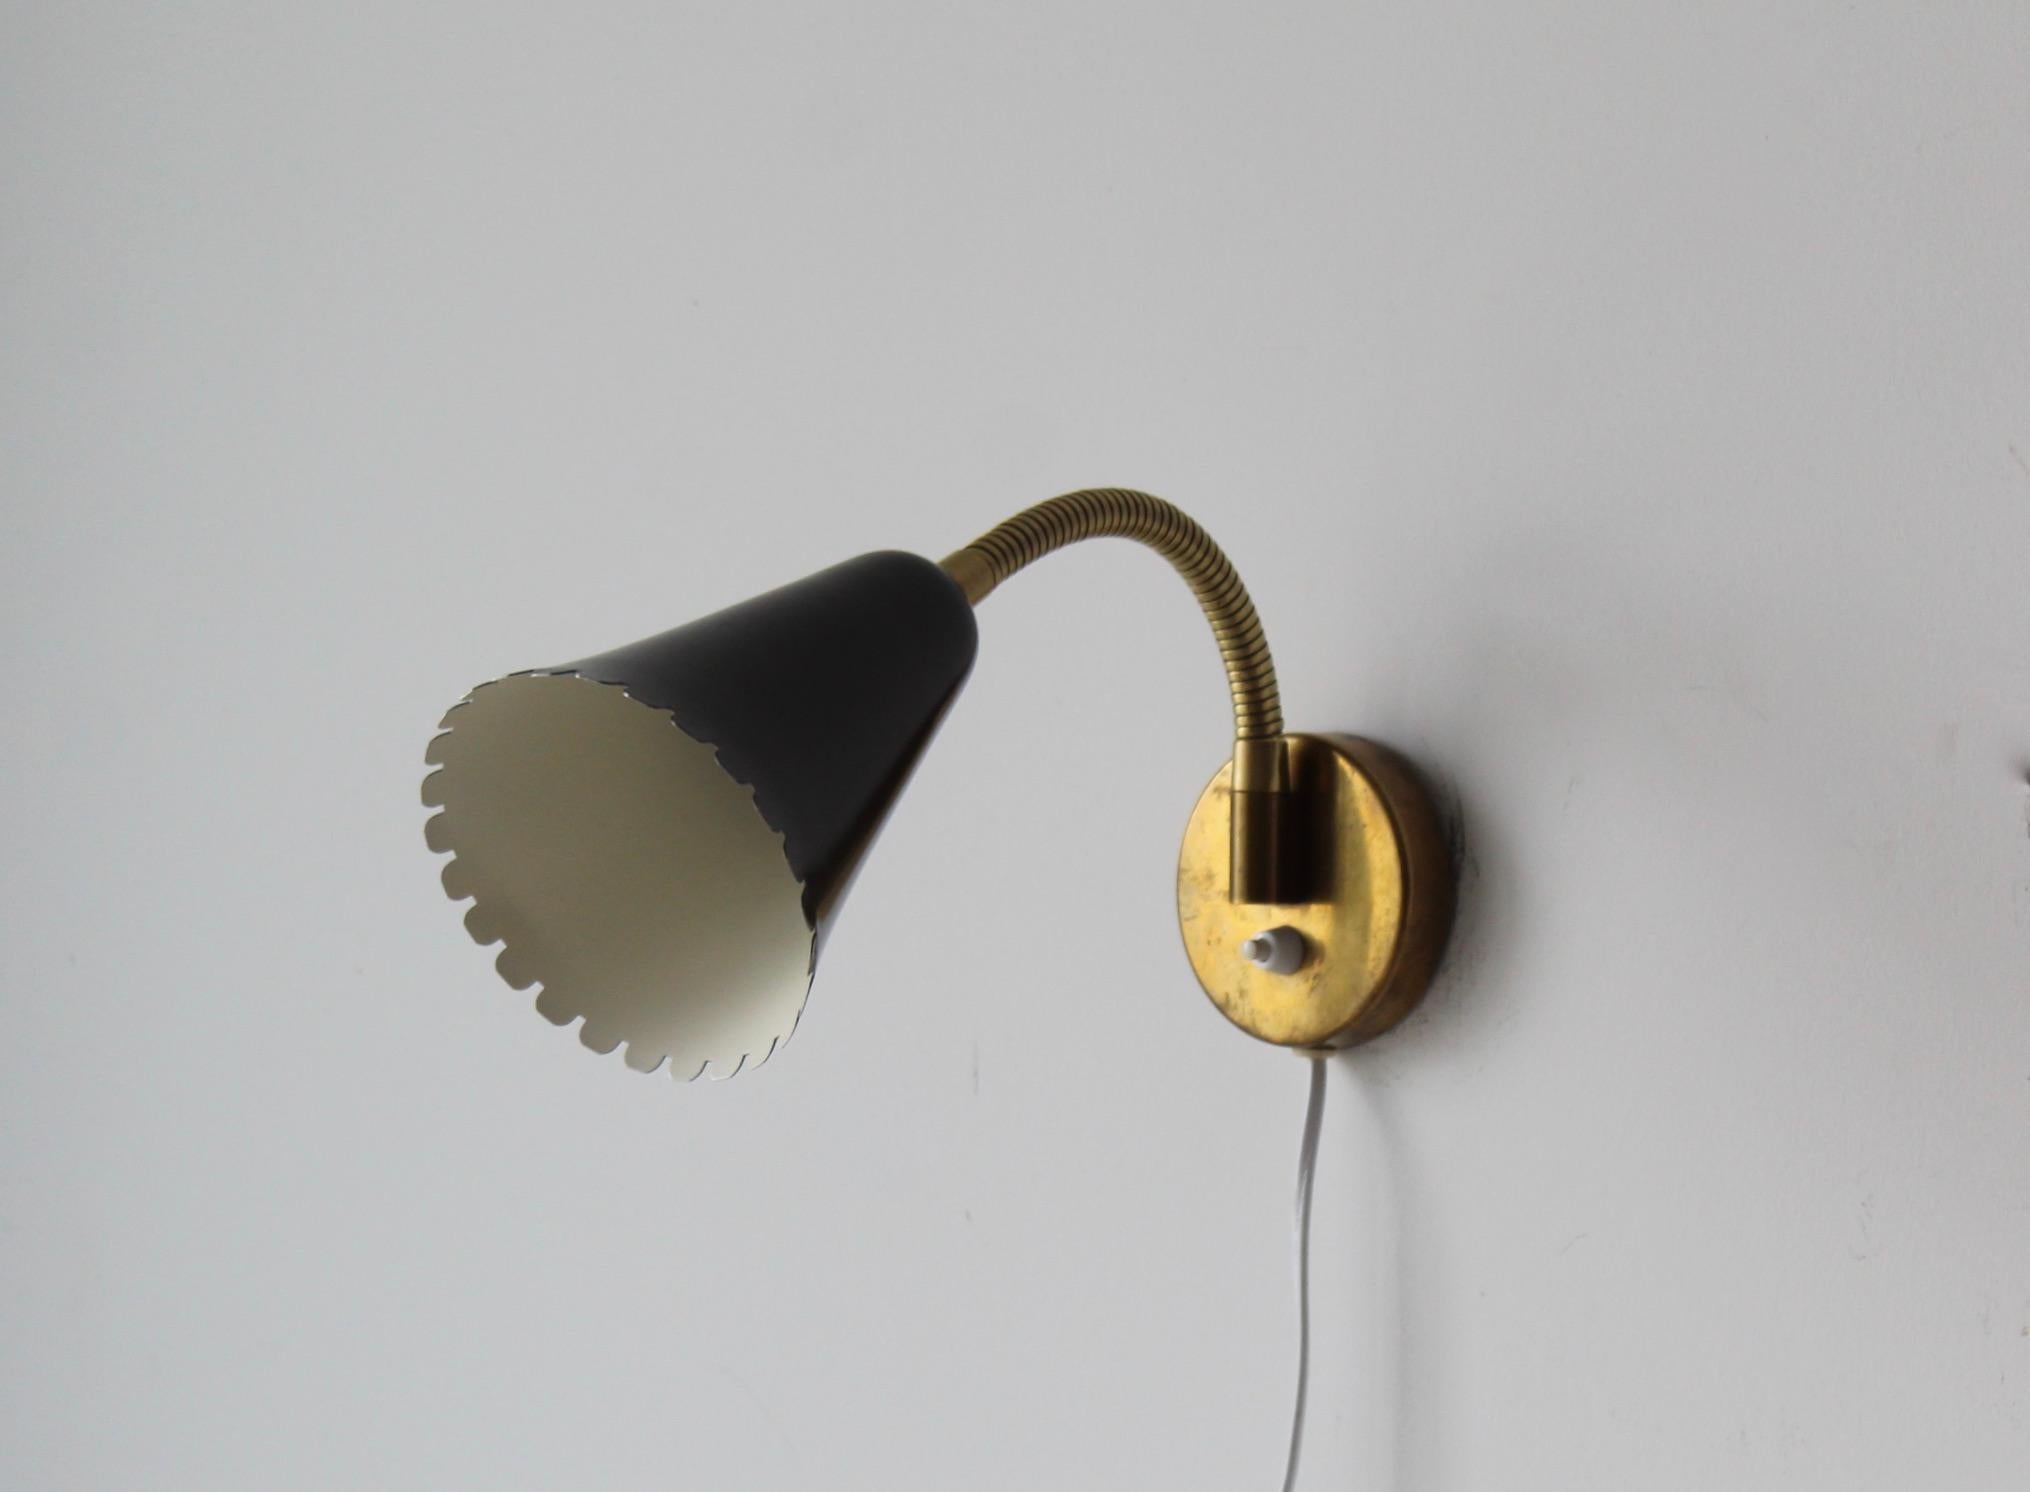 A pair of adjustable organic wall light / sconce. Designed and produced by Böhlmarks, Sweden, 1950s. In brass and black-lacquered metal. Markings indicate patented design. 

The arm takes one lightbulb on standard medium socket. No stated max